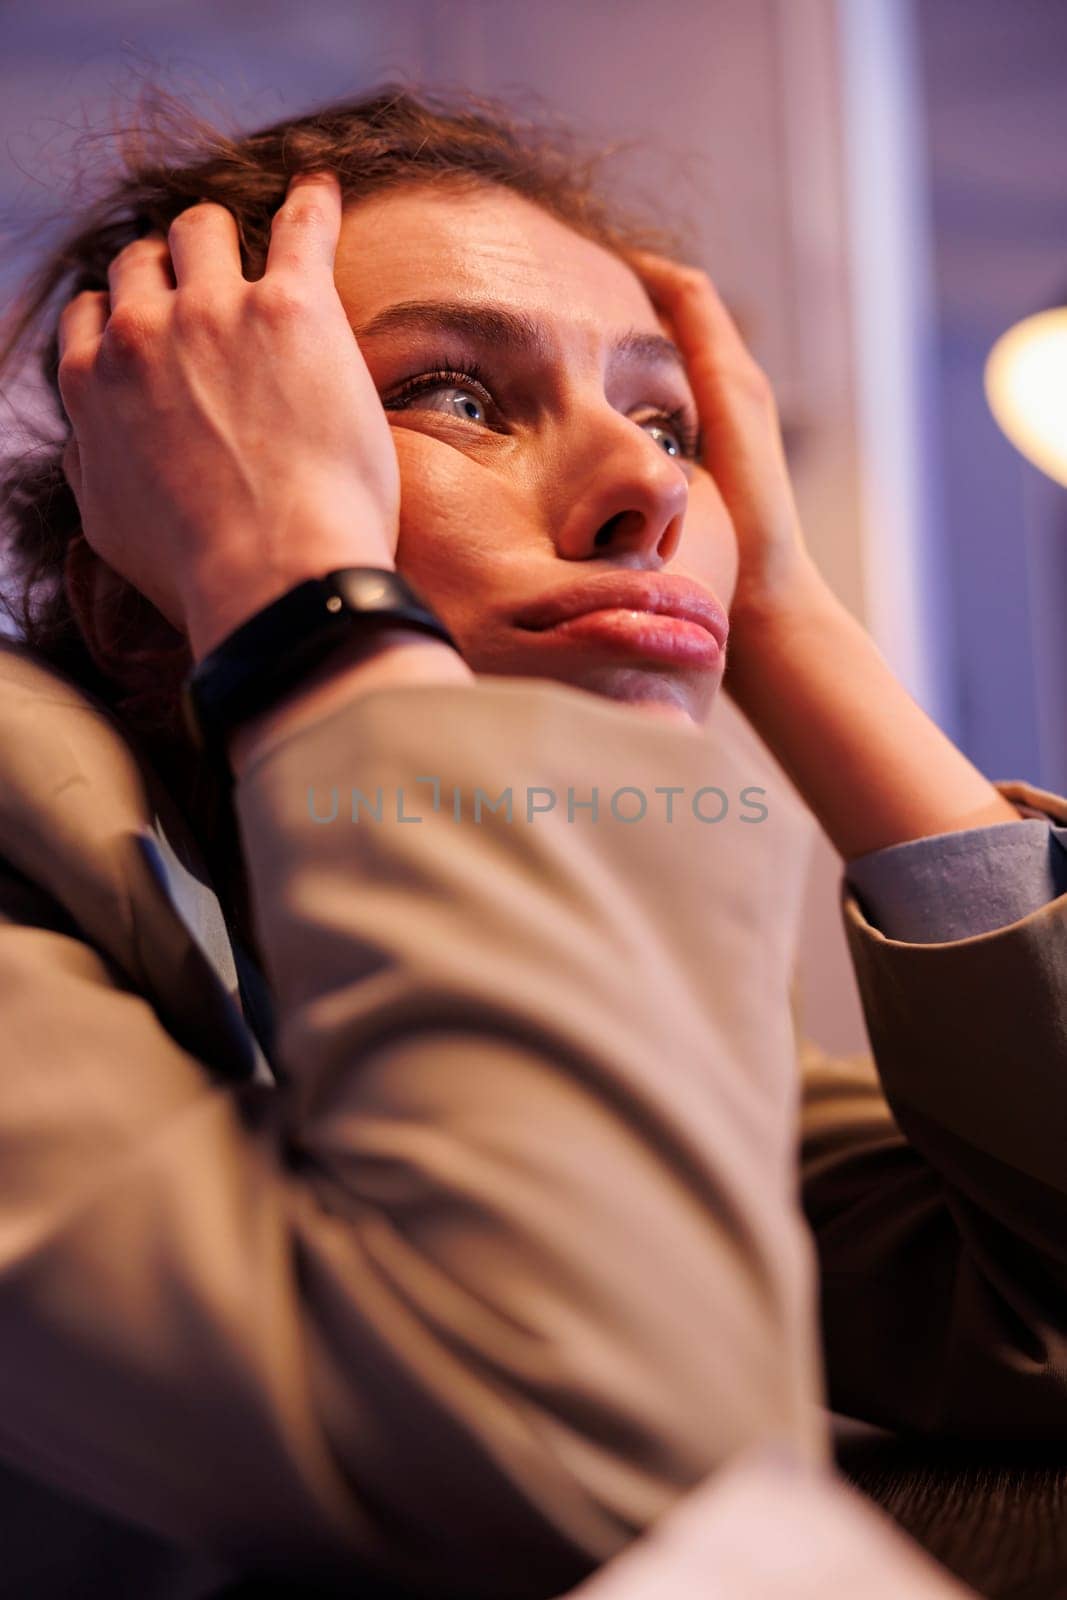 Tired overworked businesswoman brainstorming business ideas by DCStudio